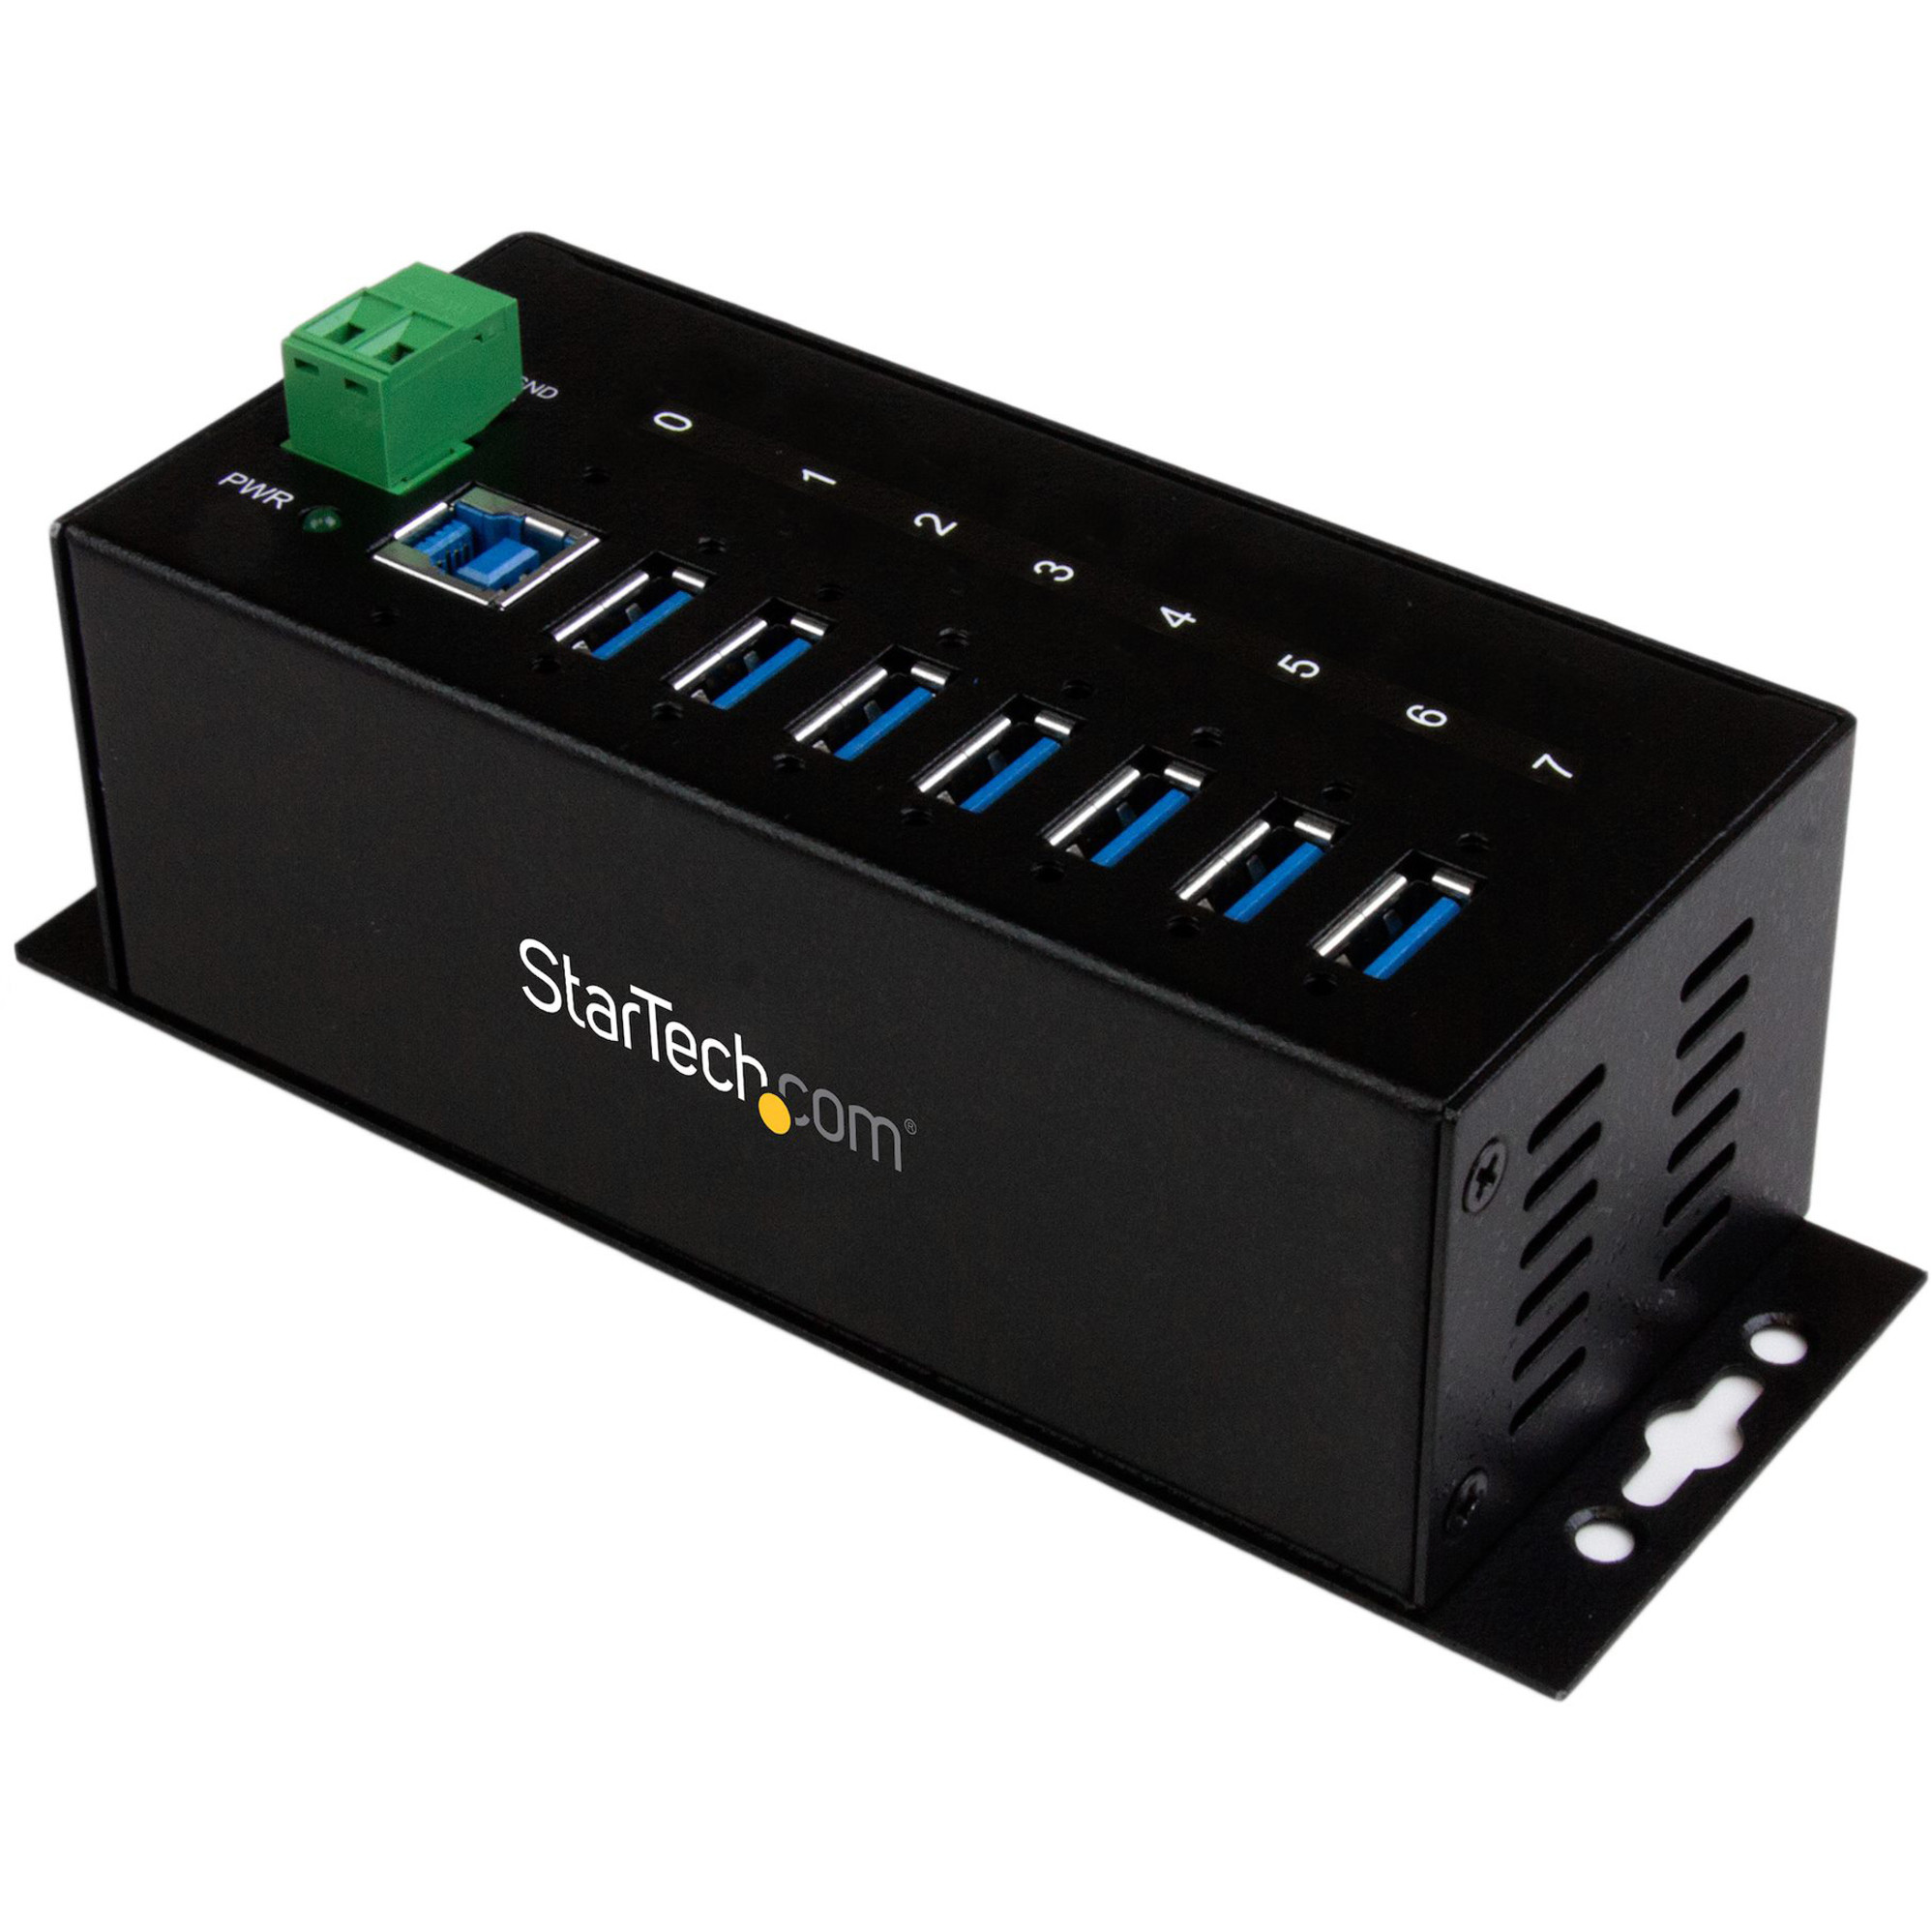 Startech .com 7 Port Industrial USB 3.0 Hub with ESDAdd seven USB 3.0 ports with this DIN rail or surface-mountable metal hub15kV ESD P… ST7300USBME